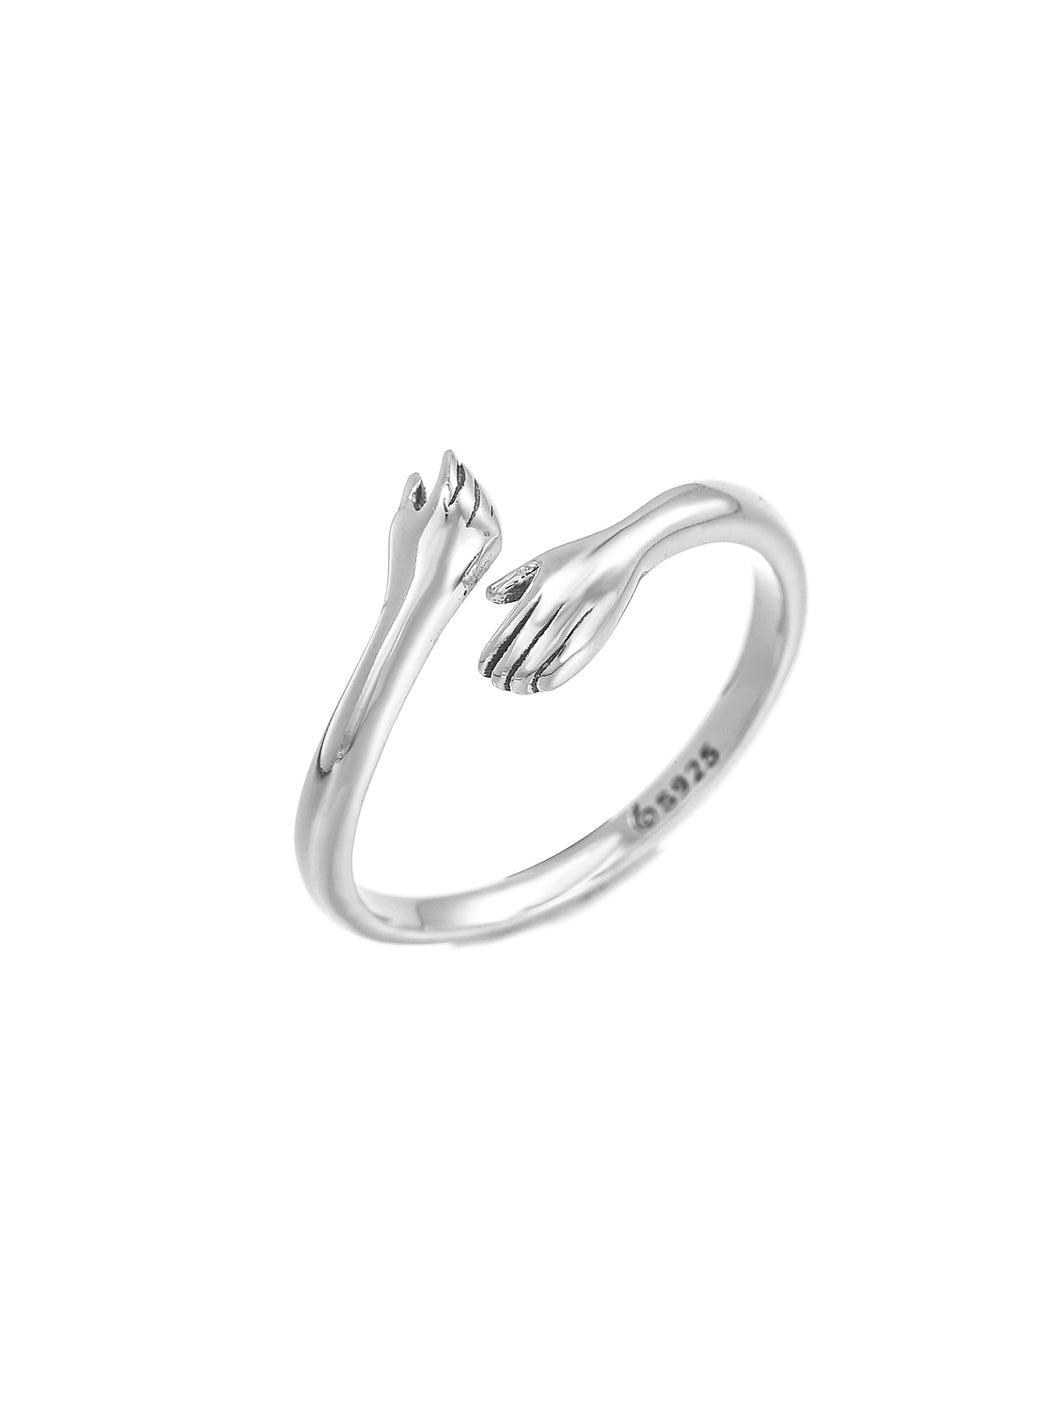 Hand Design Silver Wrap Ring